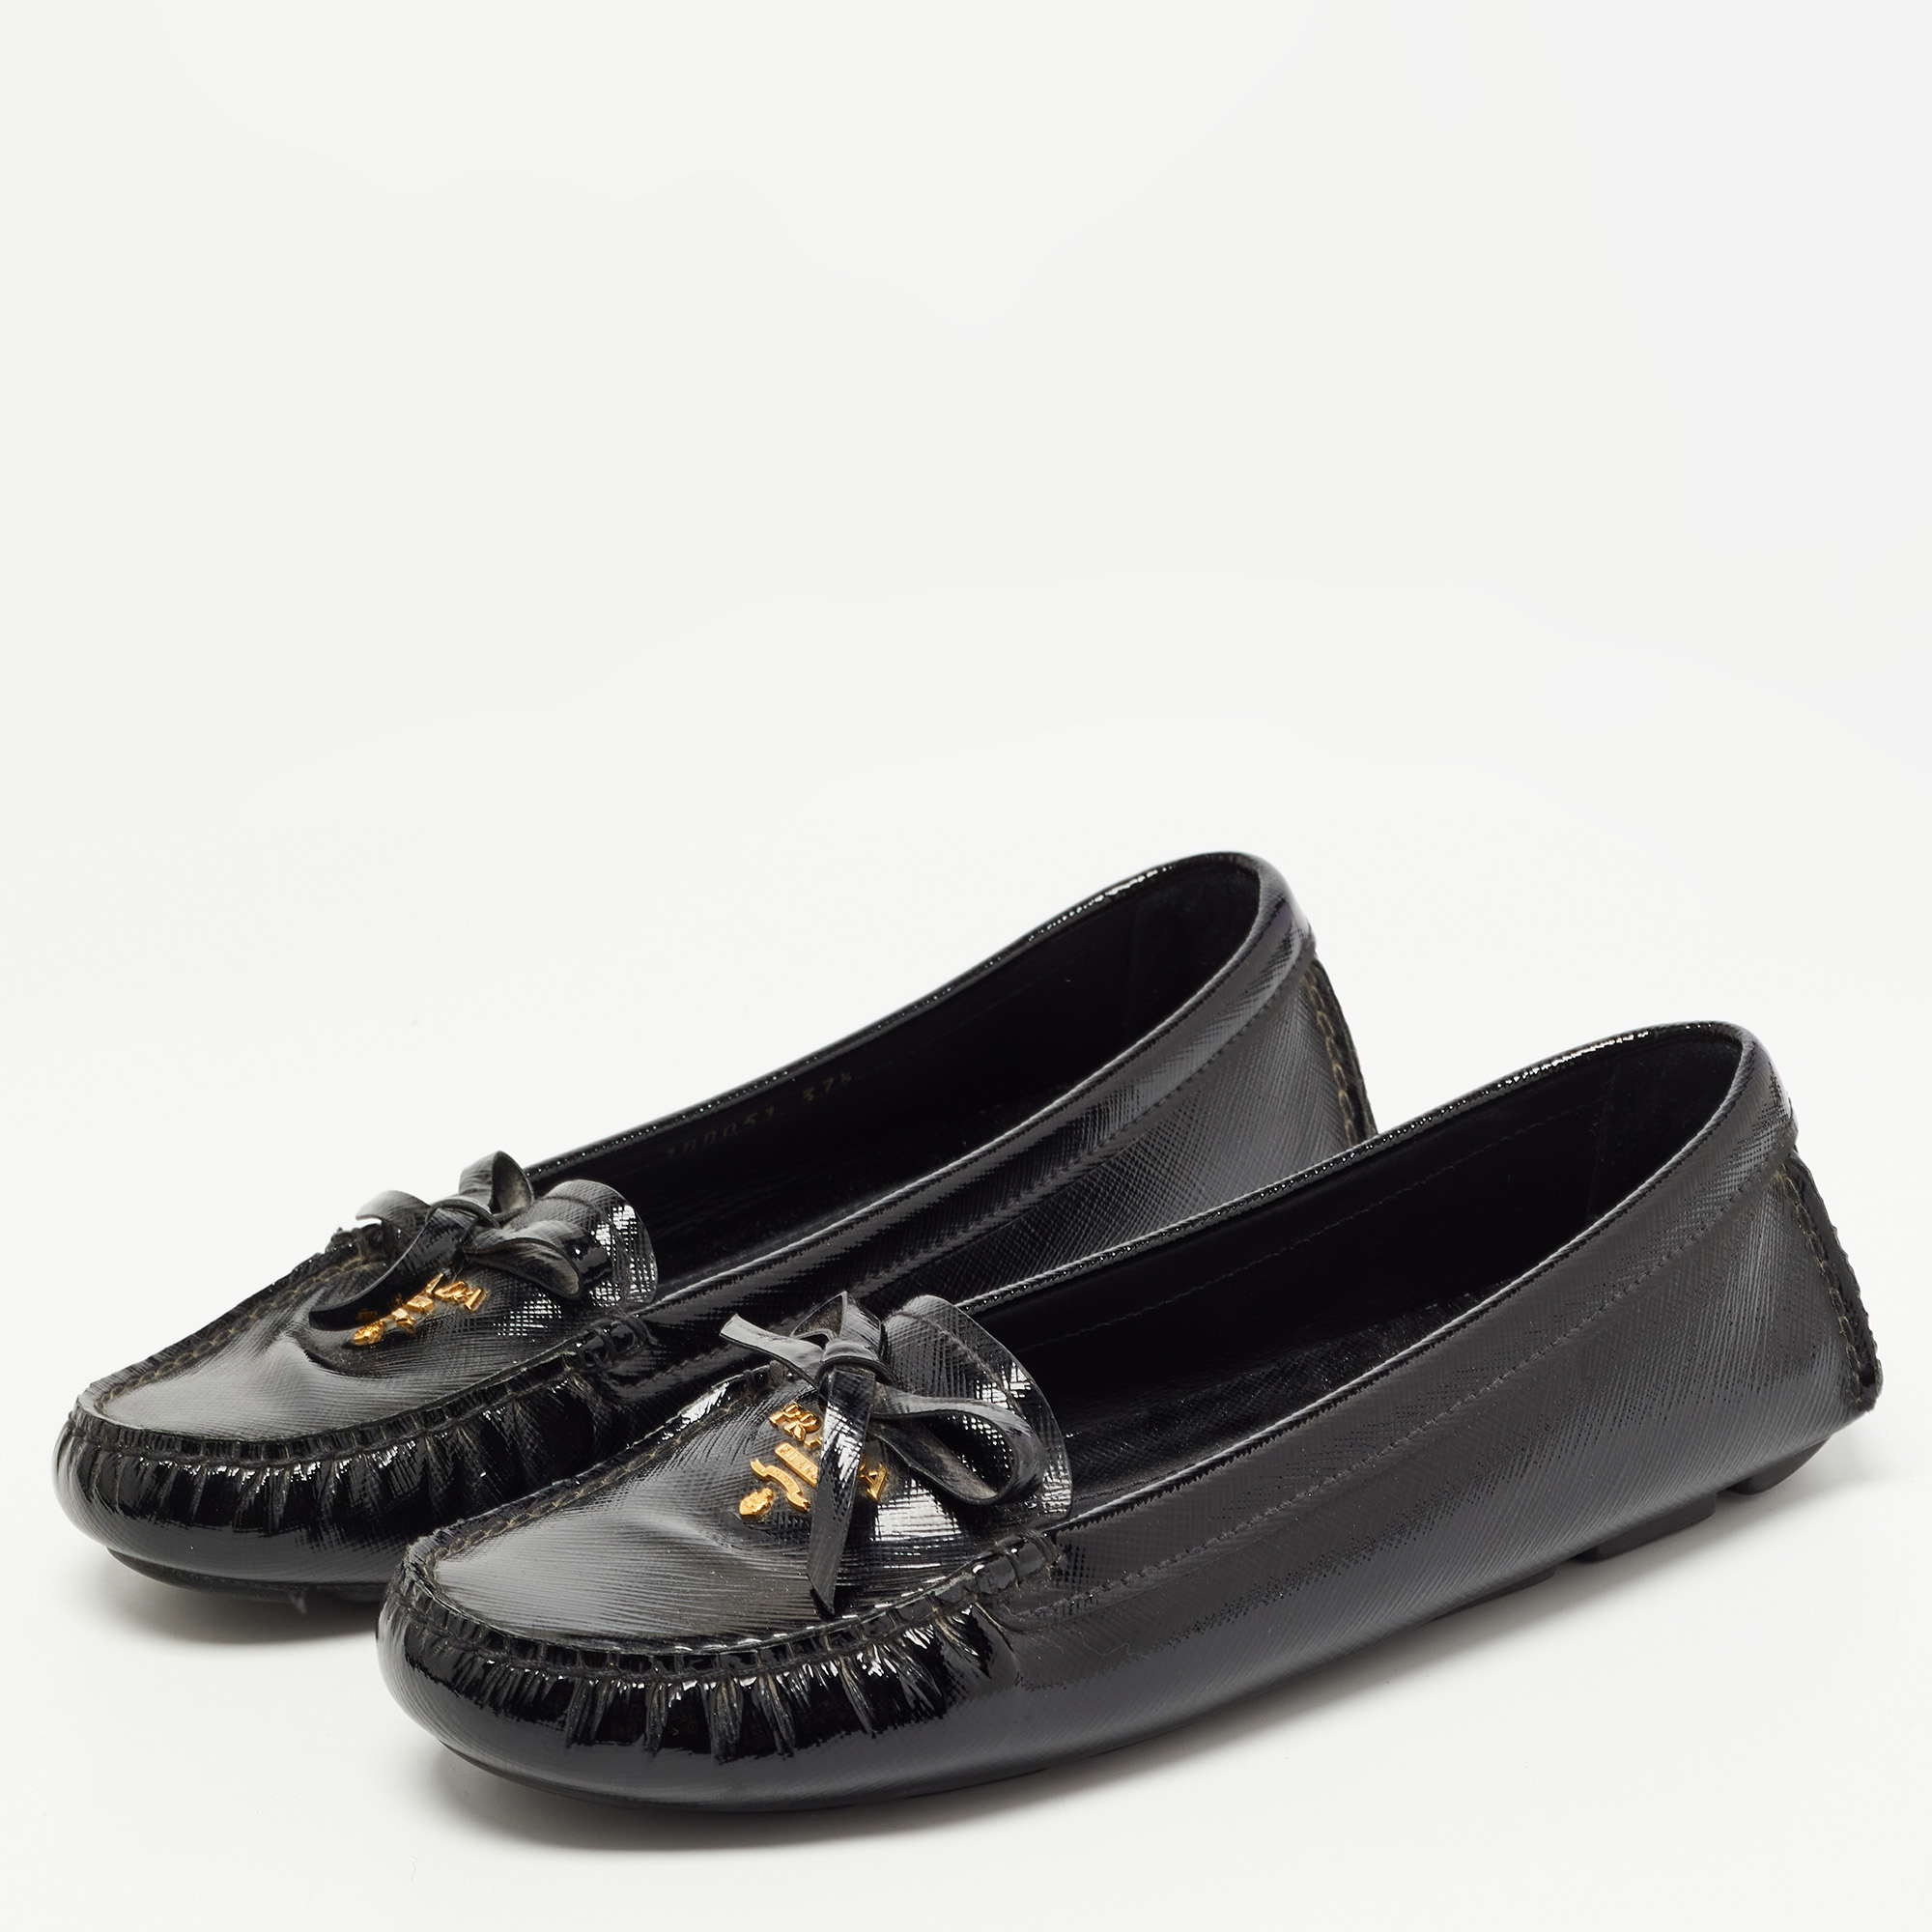 

Prada Black Patent Leather Bow Detail Loafers Size